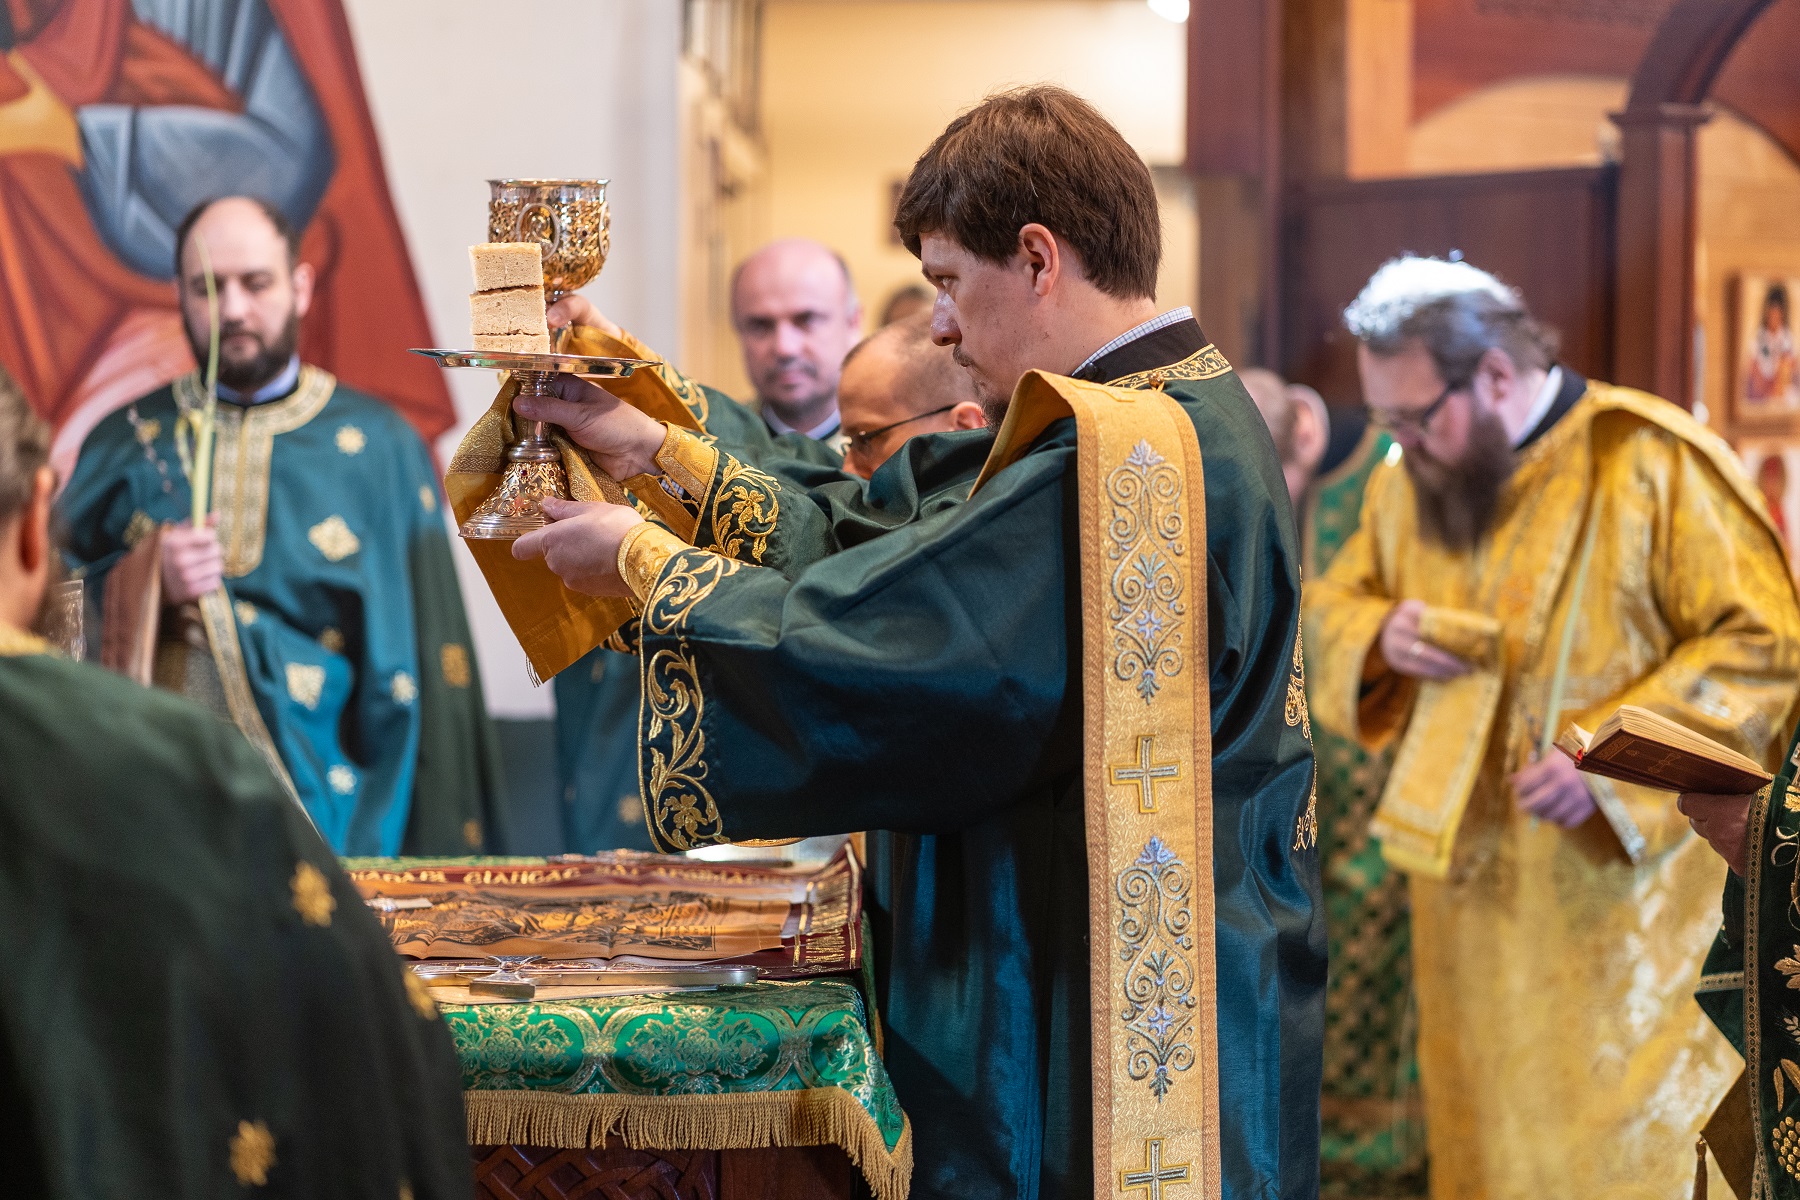 Dns Vitaly Permiakov and John Black elevate the paten and chalice during Palm Sunday liturgy